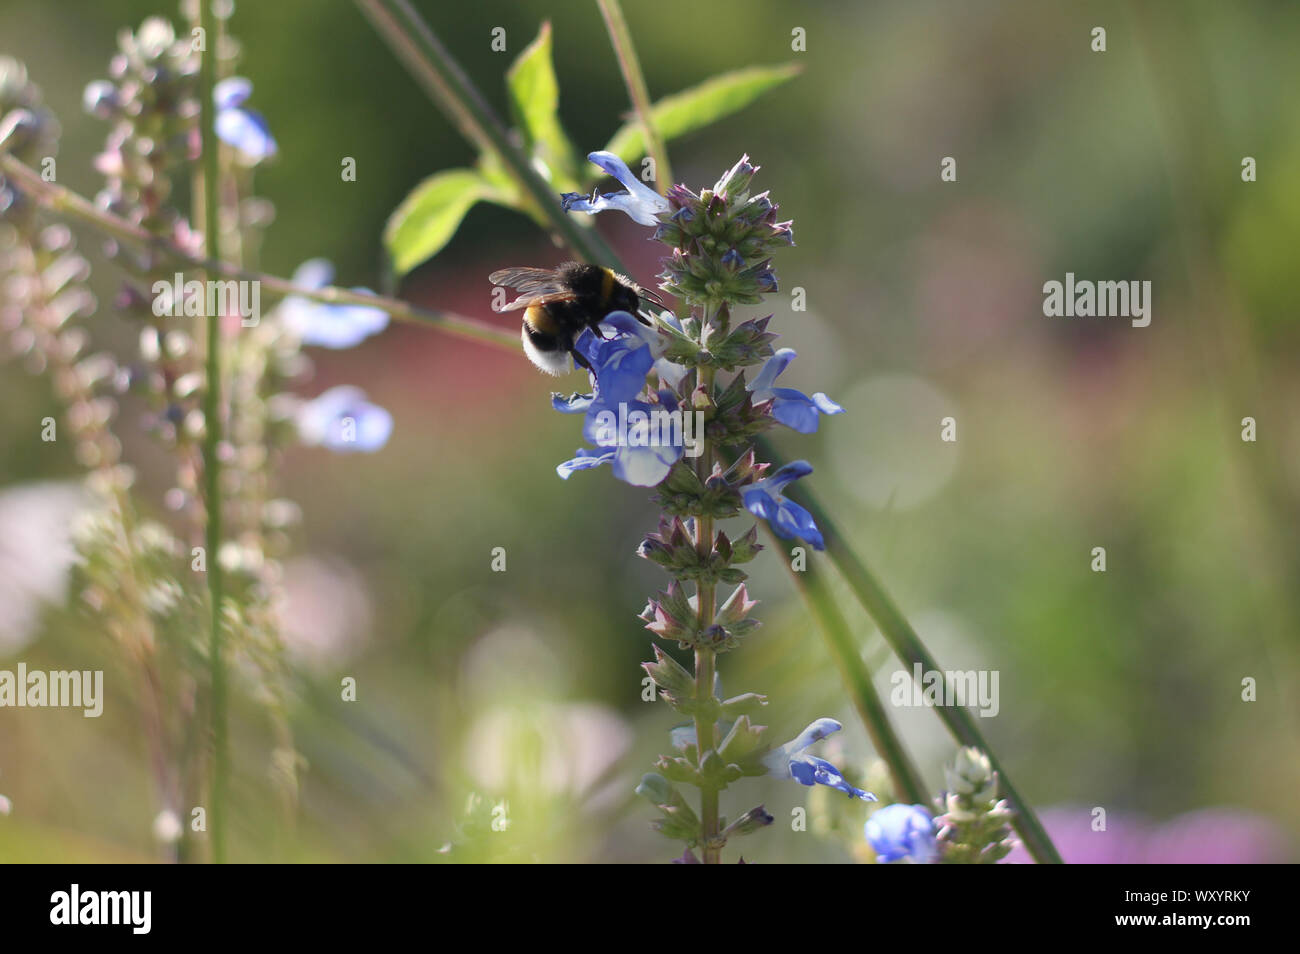 Humble-bee collecting pollen on blue bonnets or lupine. Stock Photo